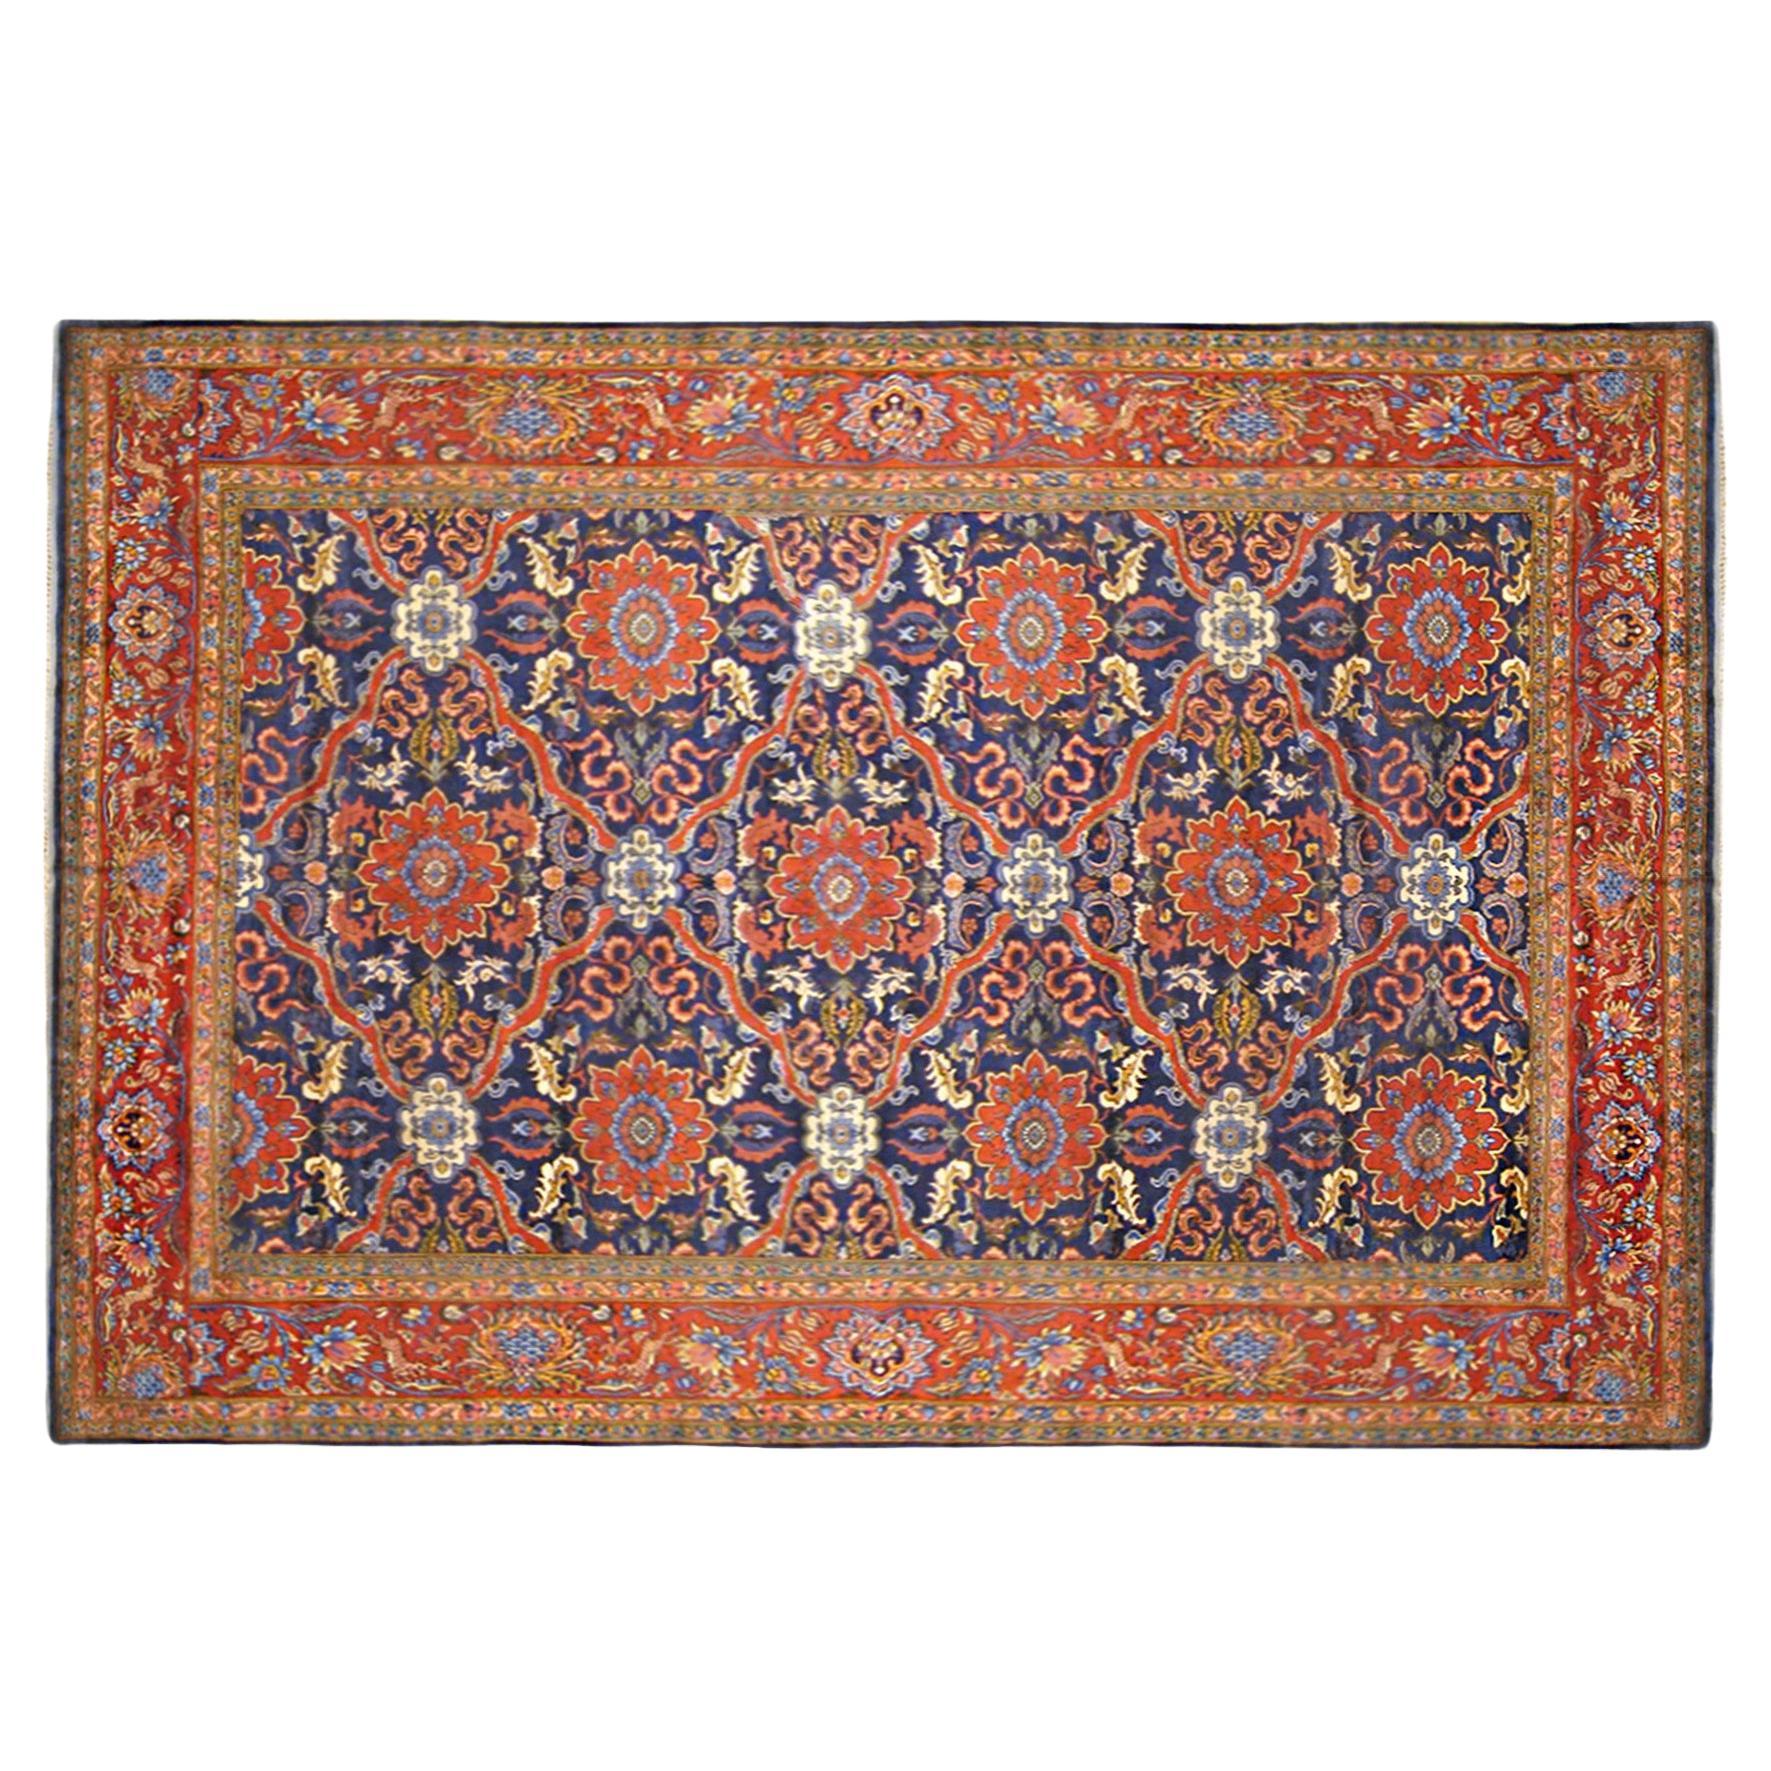 Vintage Indian Tabriz Oriental Carpet in Room Size with Repeating Design